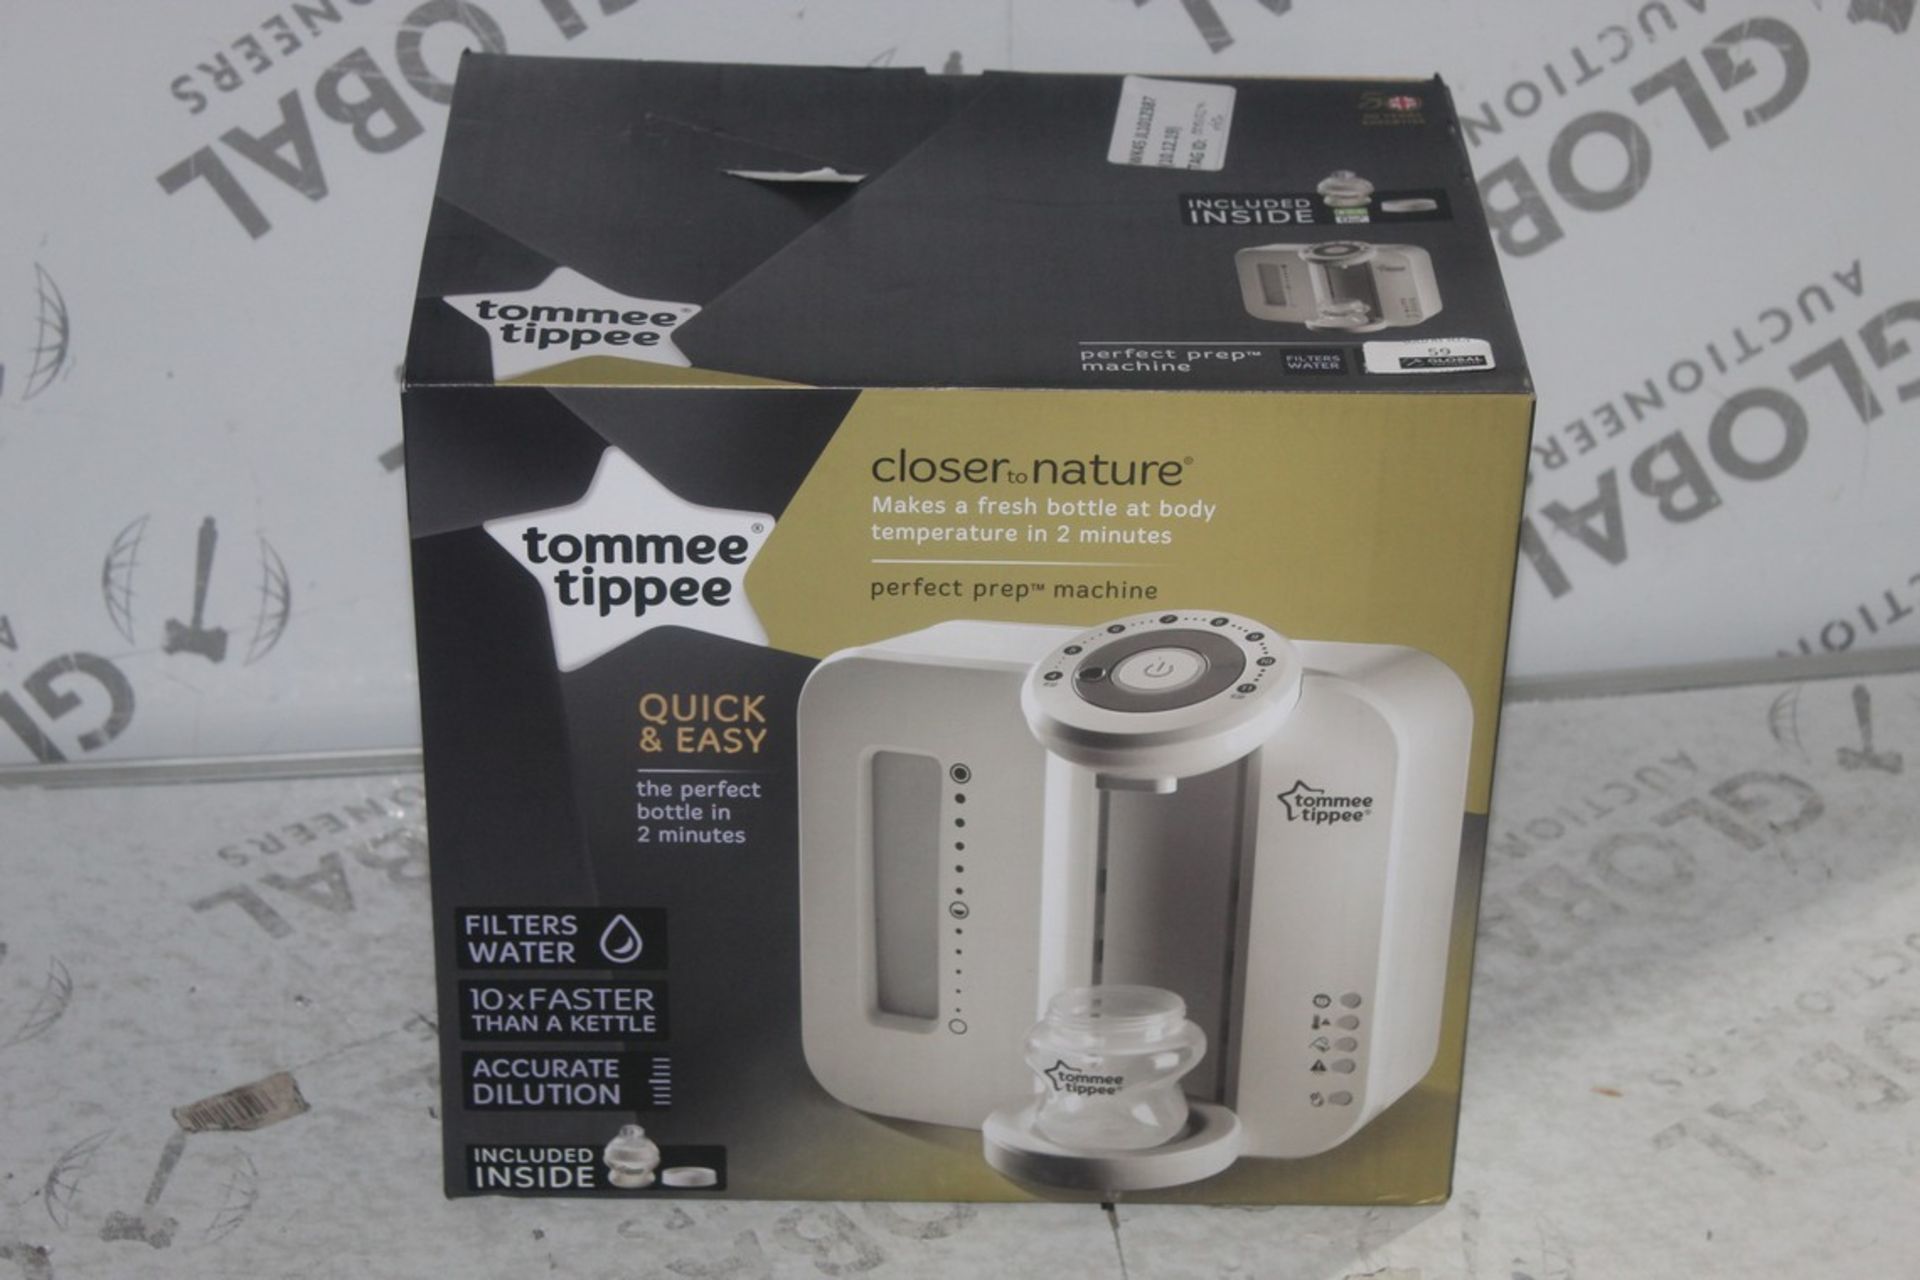 Boxed Tommee Tippee Closer to Nature Perfect Preparation Bottle Warming Station in White RRP £70 (